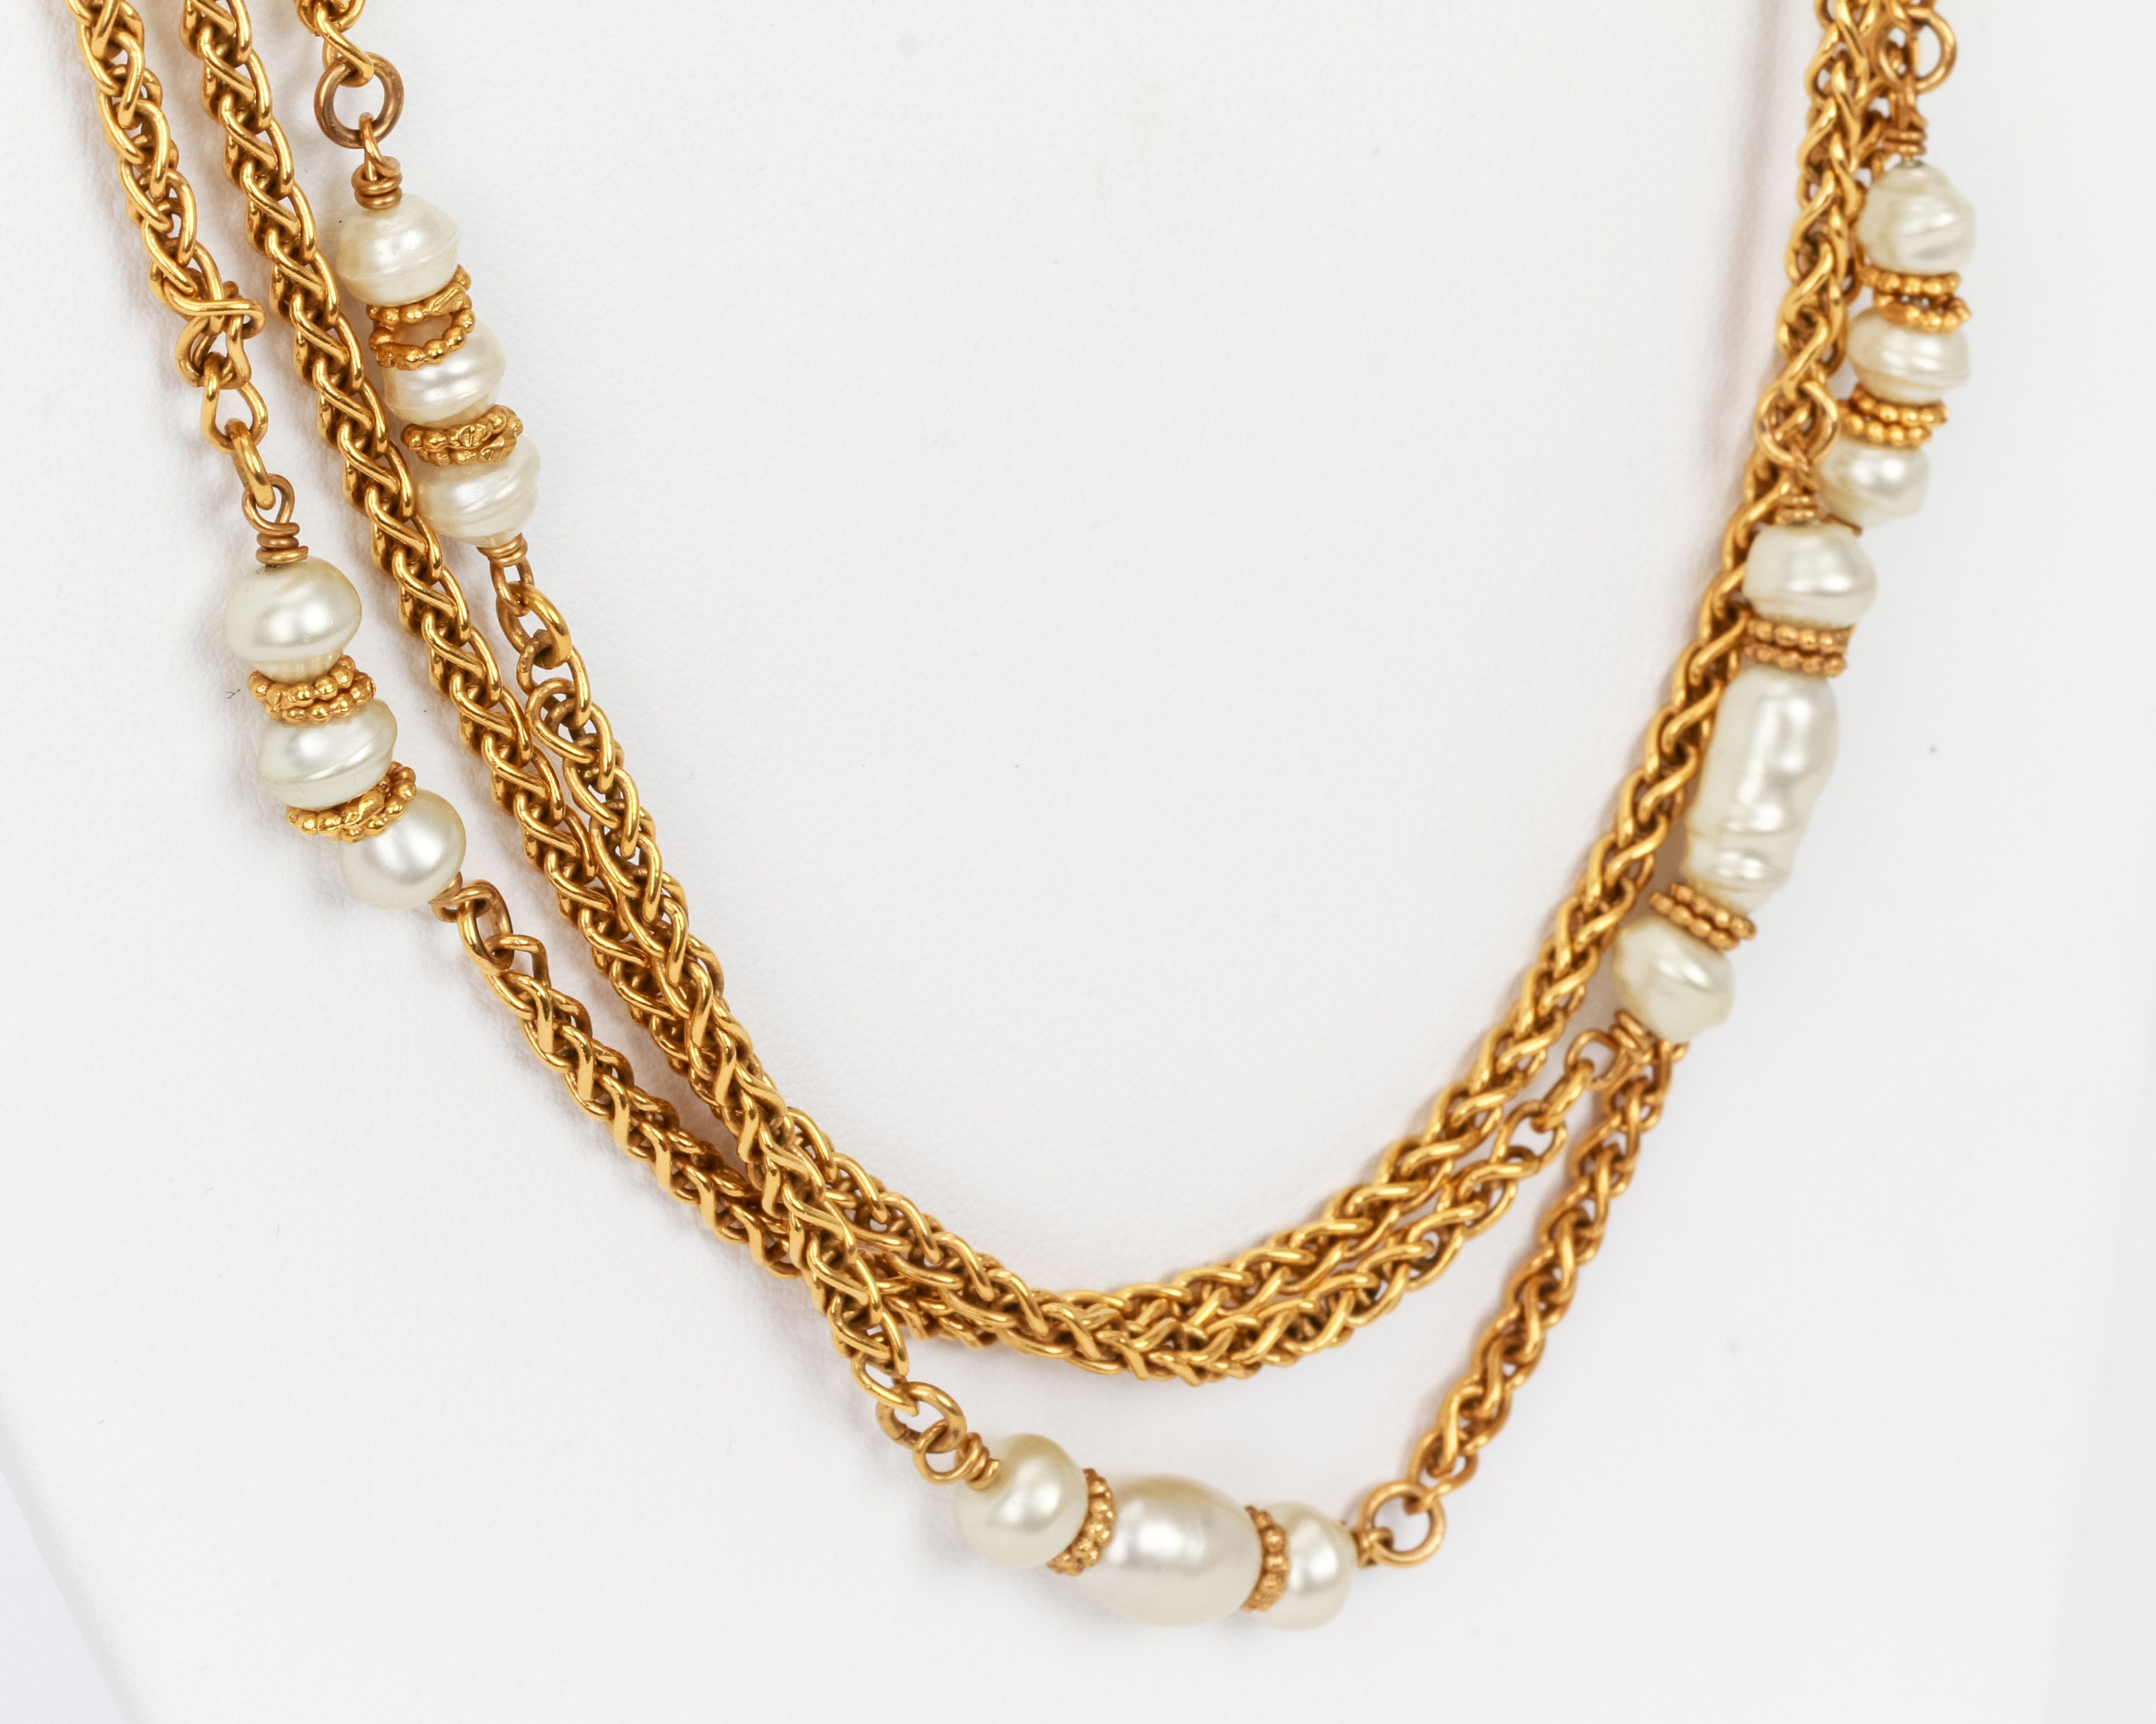 Chanel Long Sautoir Gold Pearls Necklace - Vintage Lux